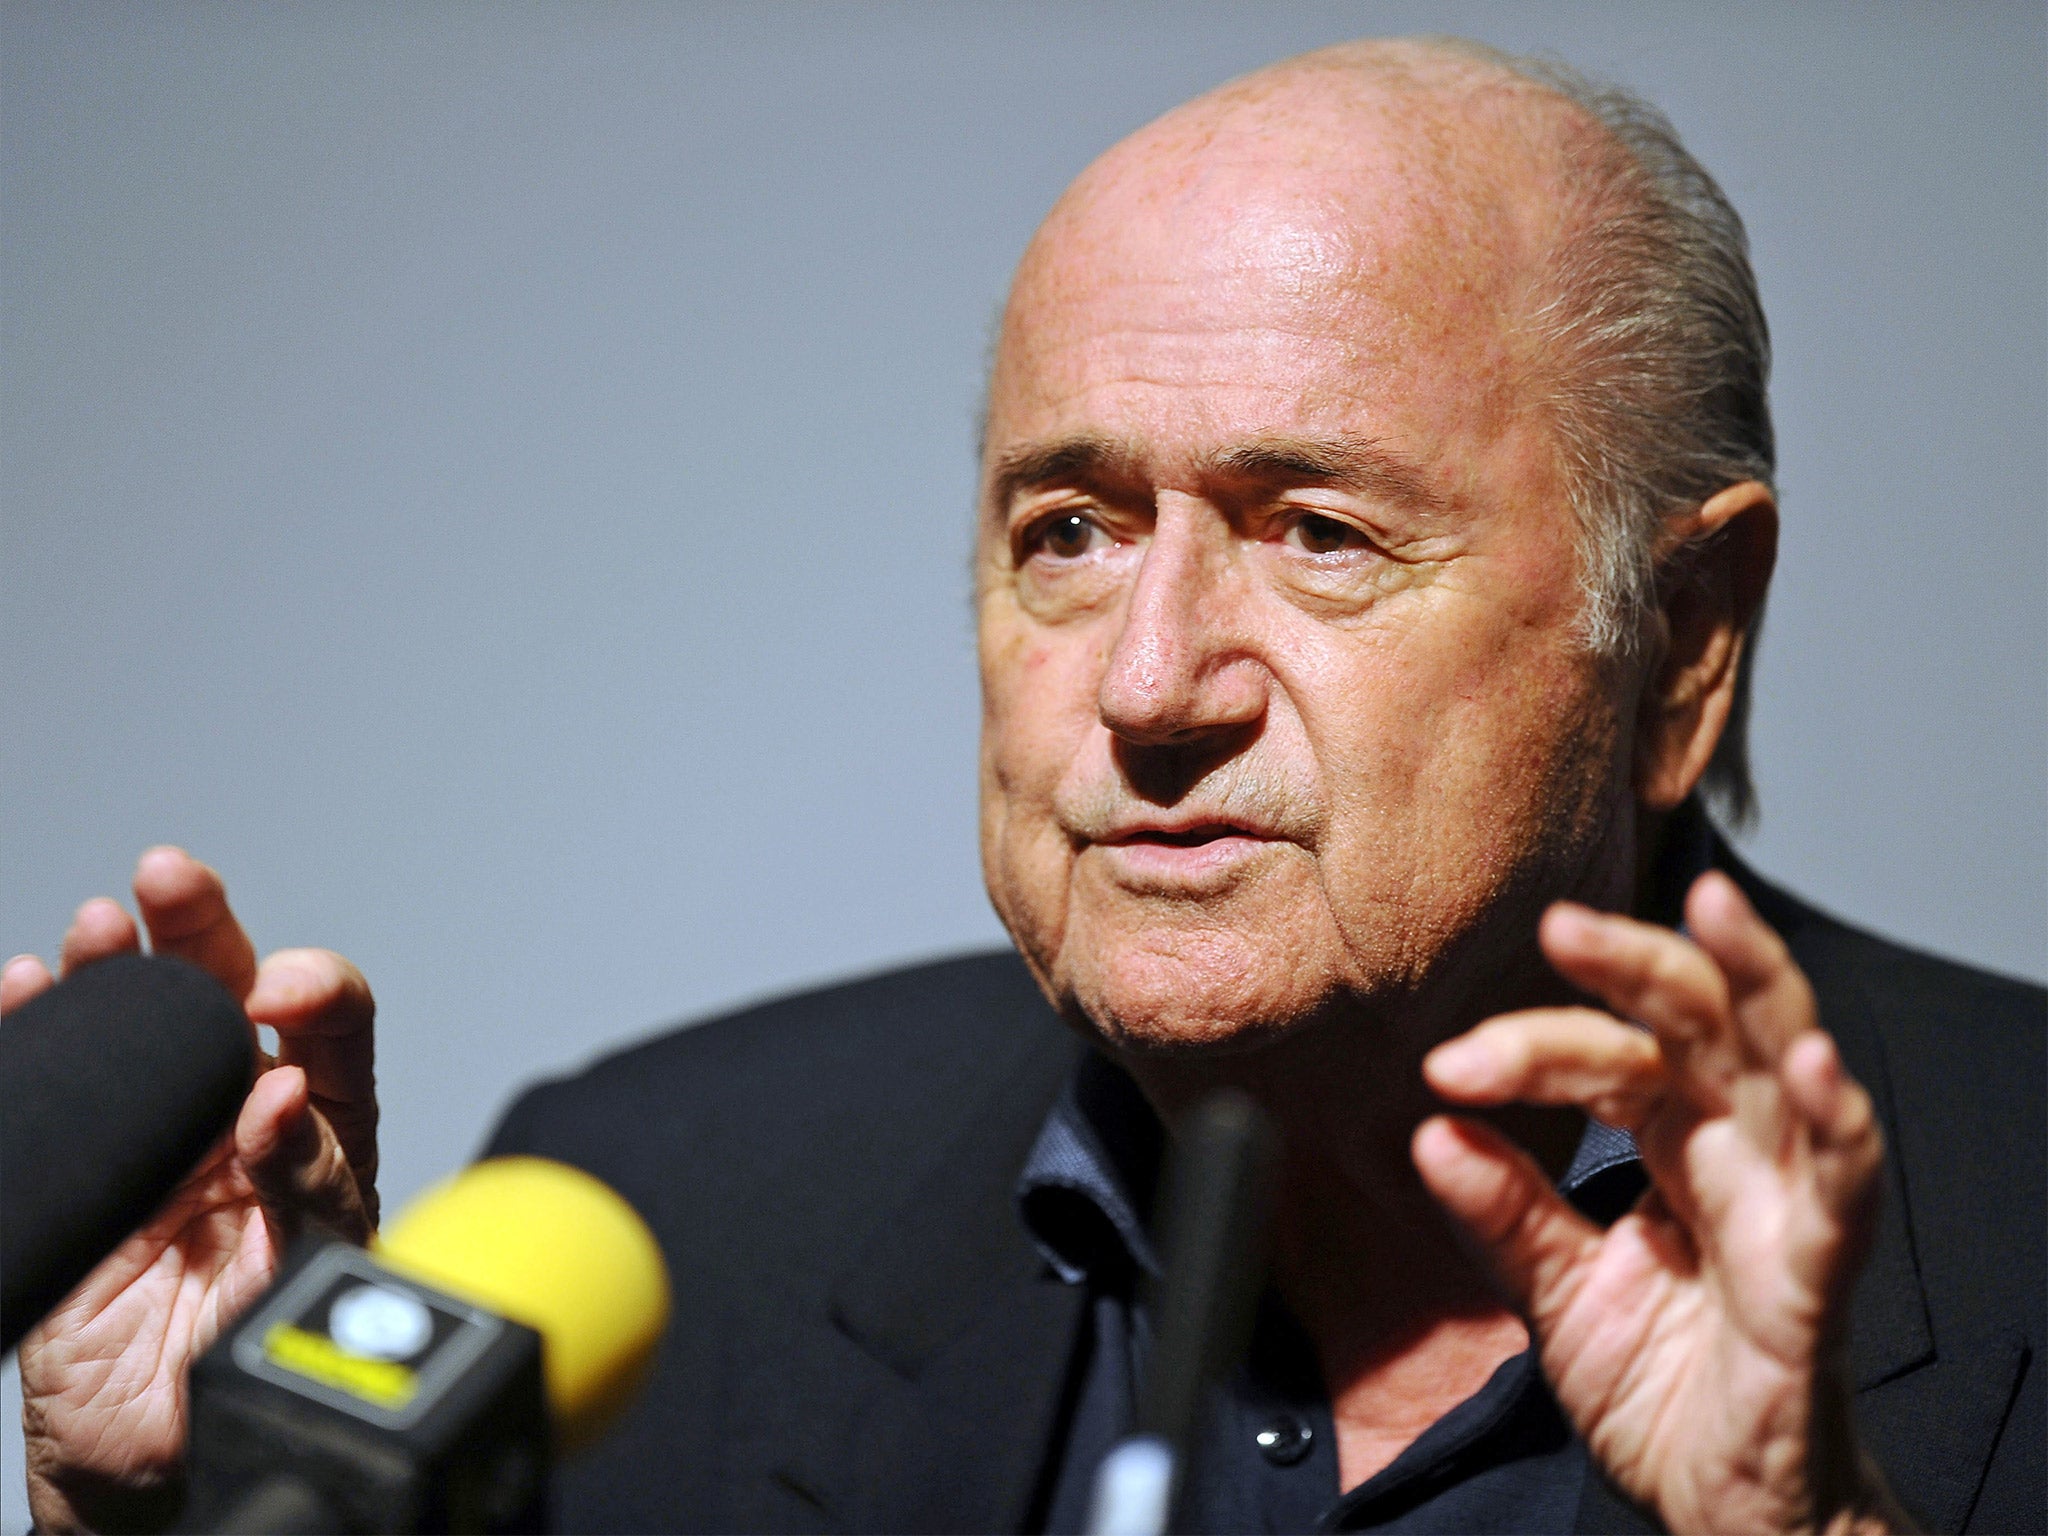 Sepp Blatter said that Fifa would violate its own rules and Swiss law by publishing corruption report